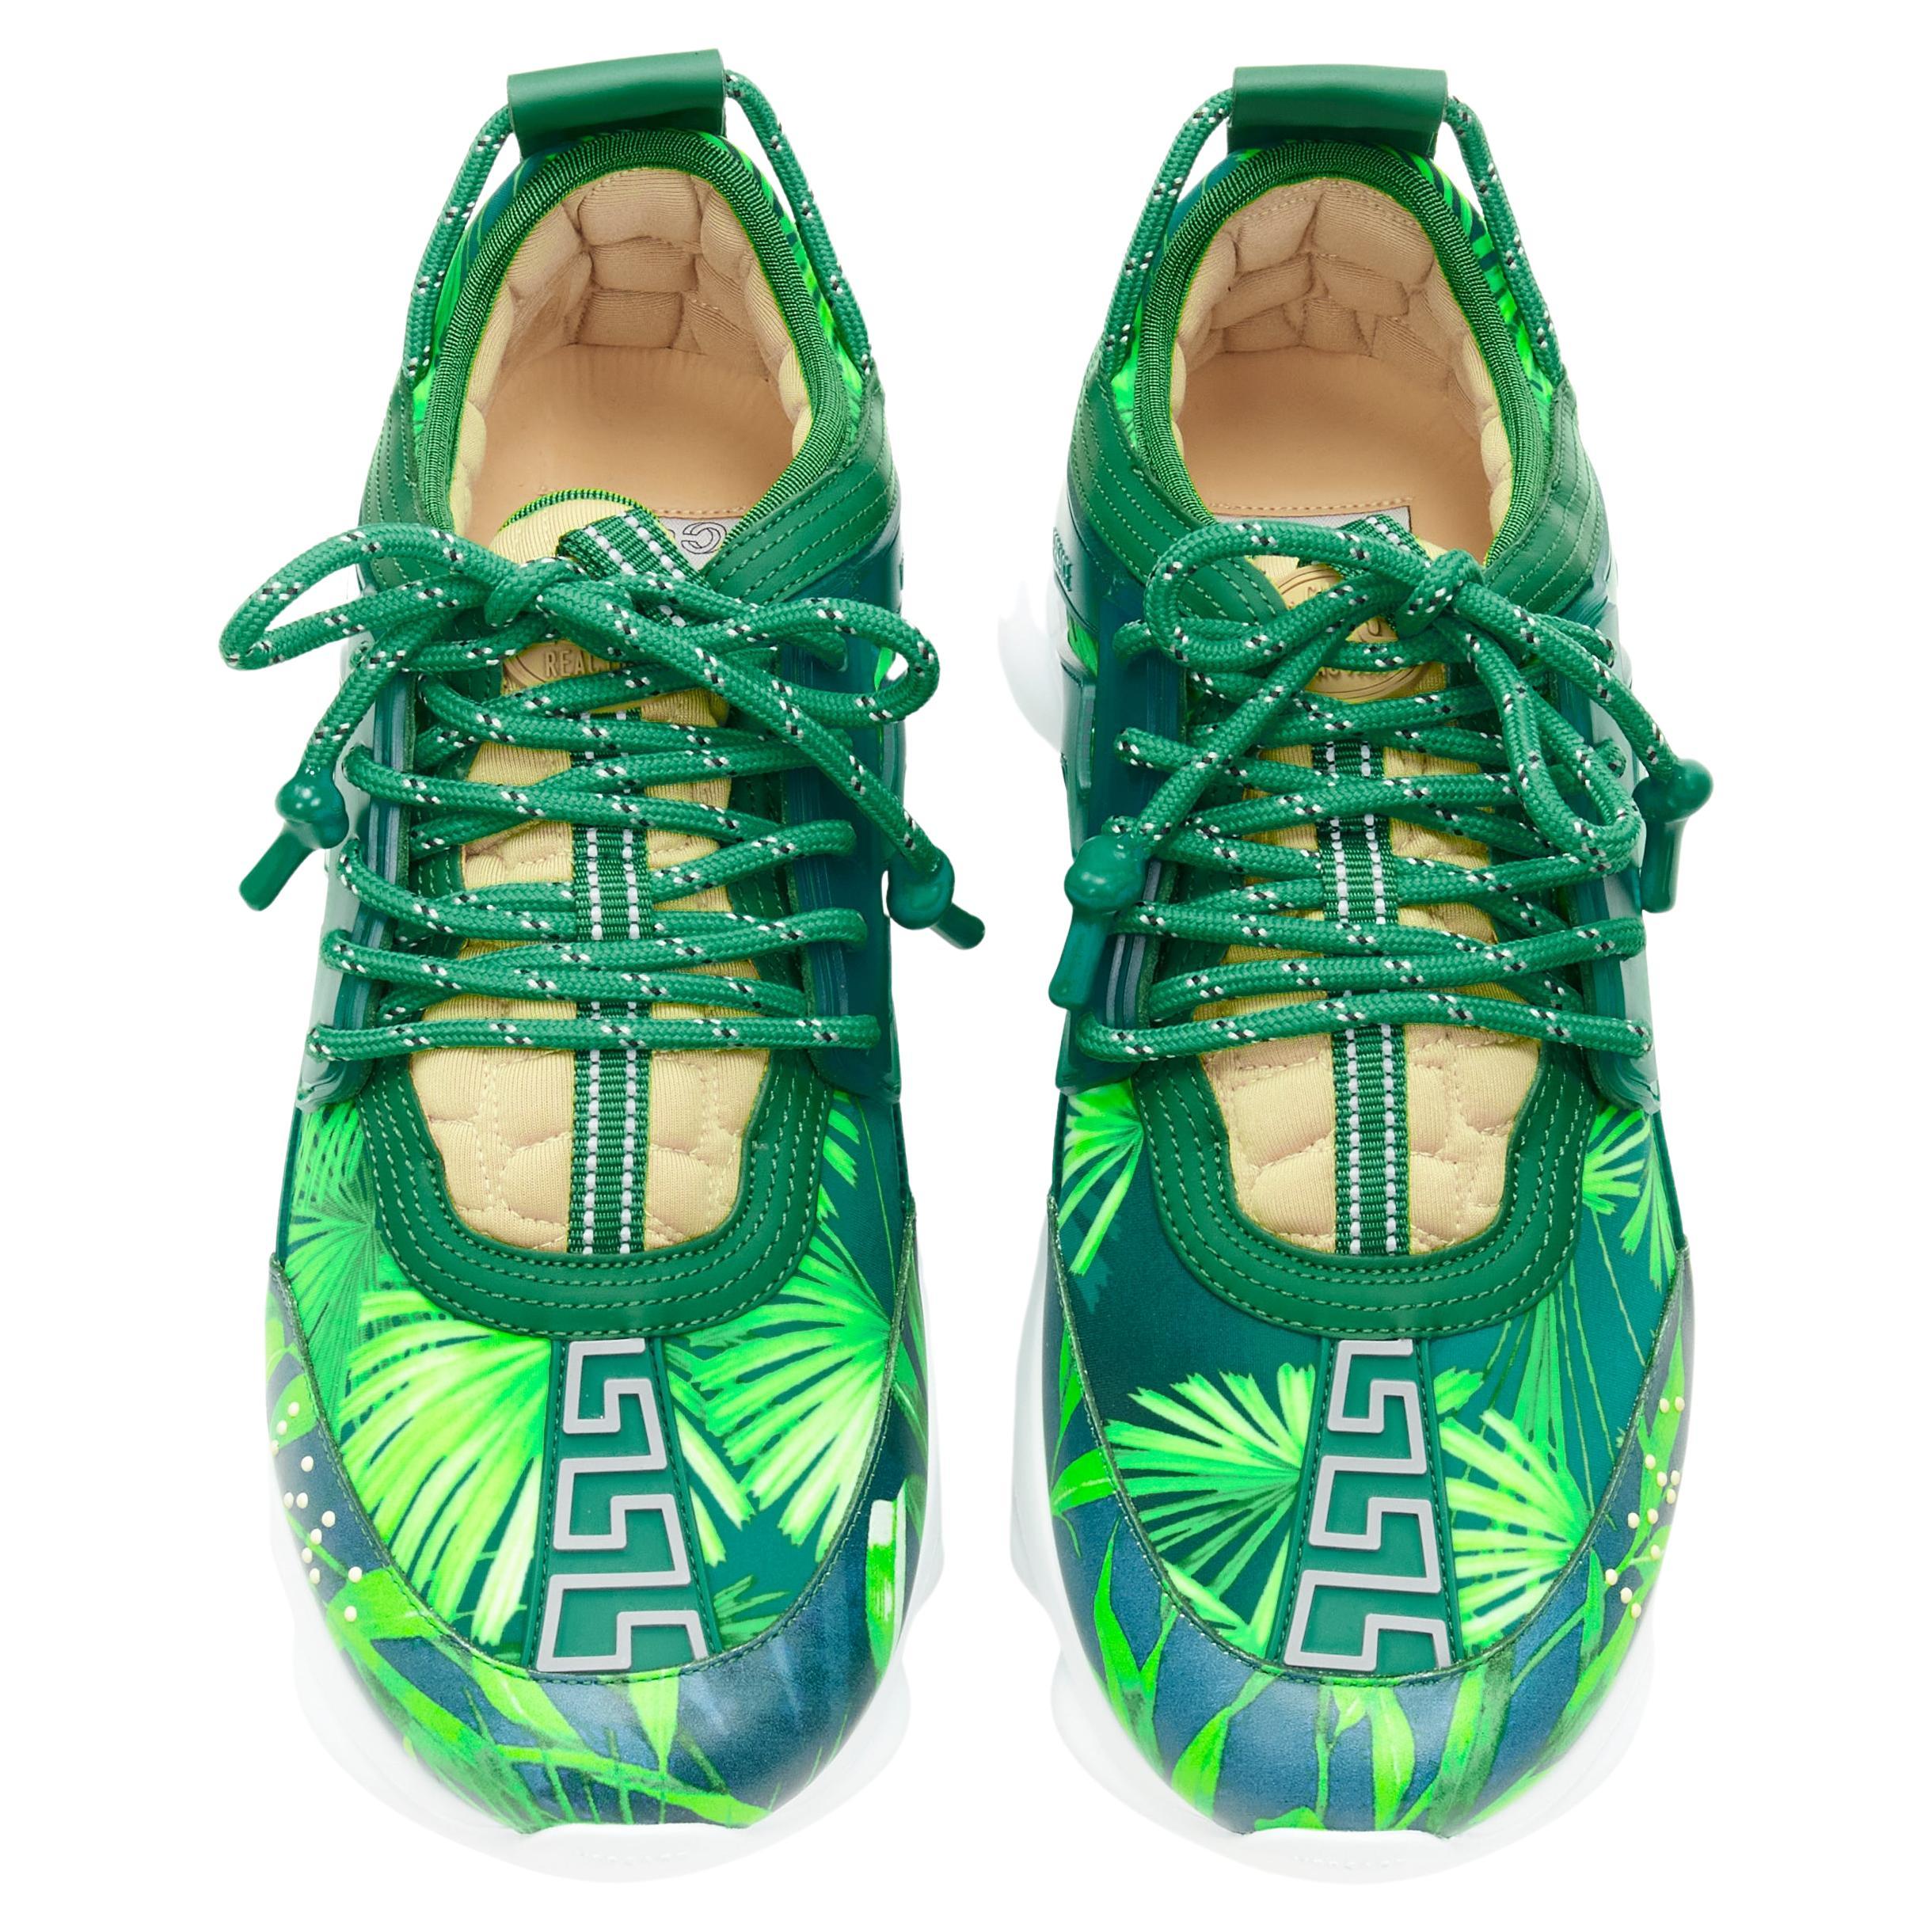 new VERSACE Chain Reaction Jungle Print green chunky sole sneaker EU46 rare
Brand: Versace
Model: Chain Reaction
Collection: Spring Summer 2020 Runway
Extra Detail: Limited Edition Jungle Print made famous by Jennifer Lopez printed on the leather of